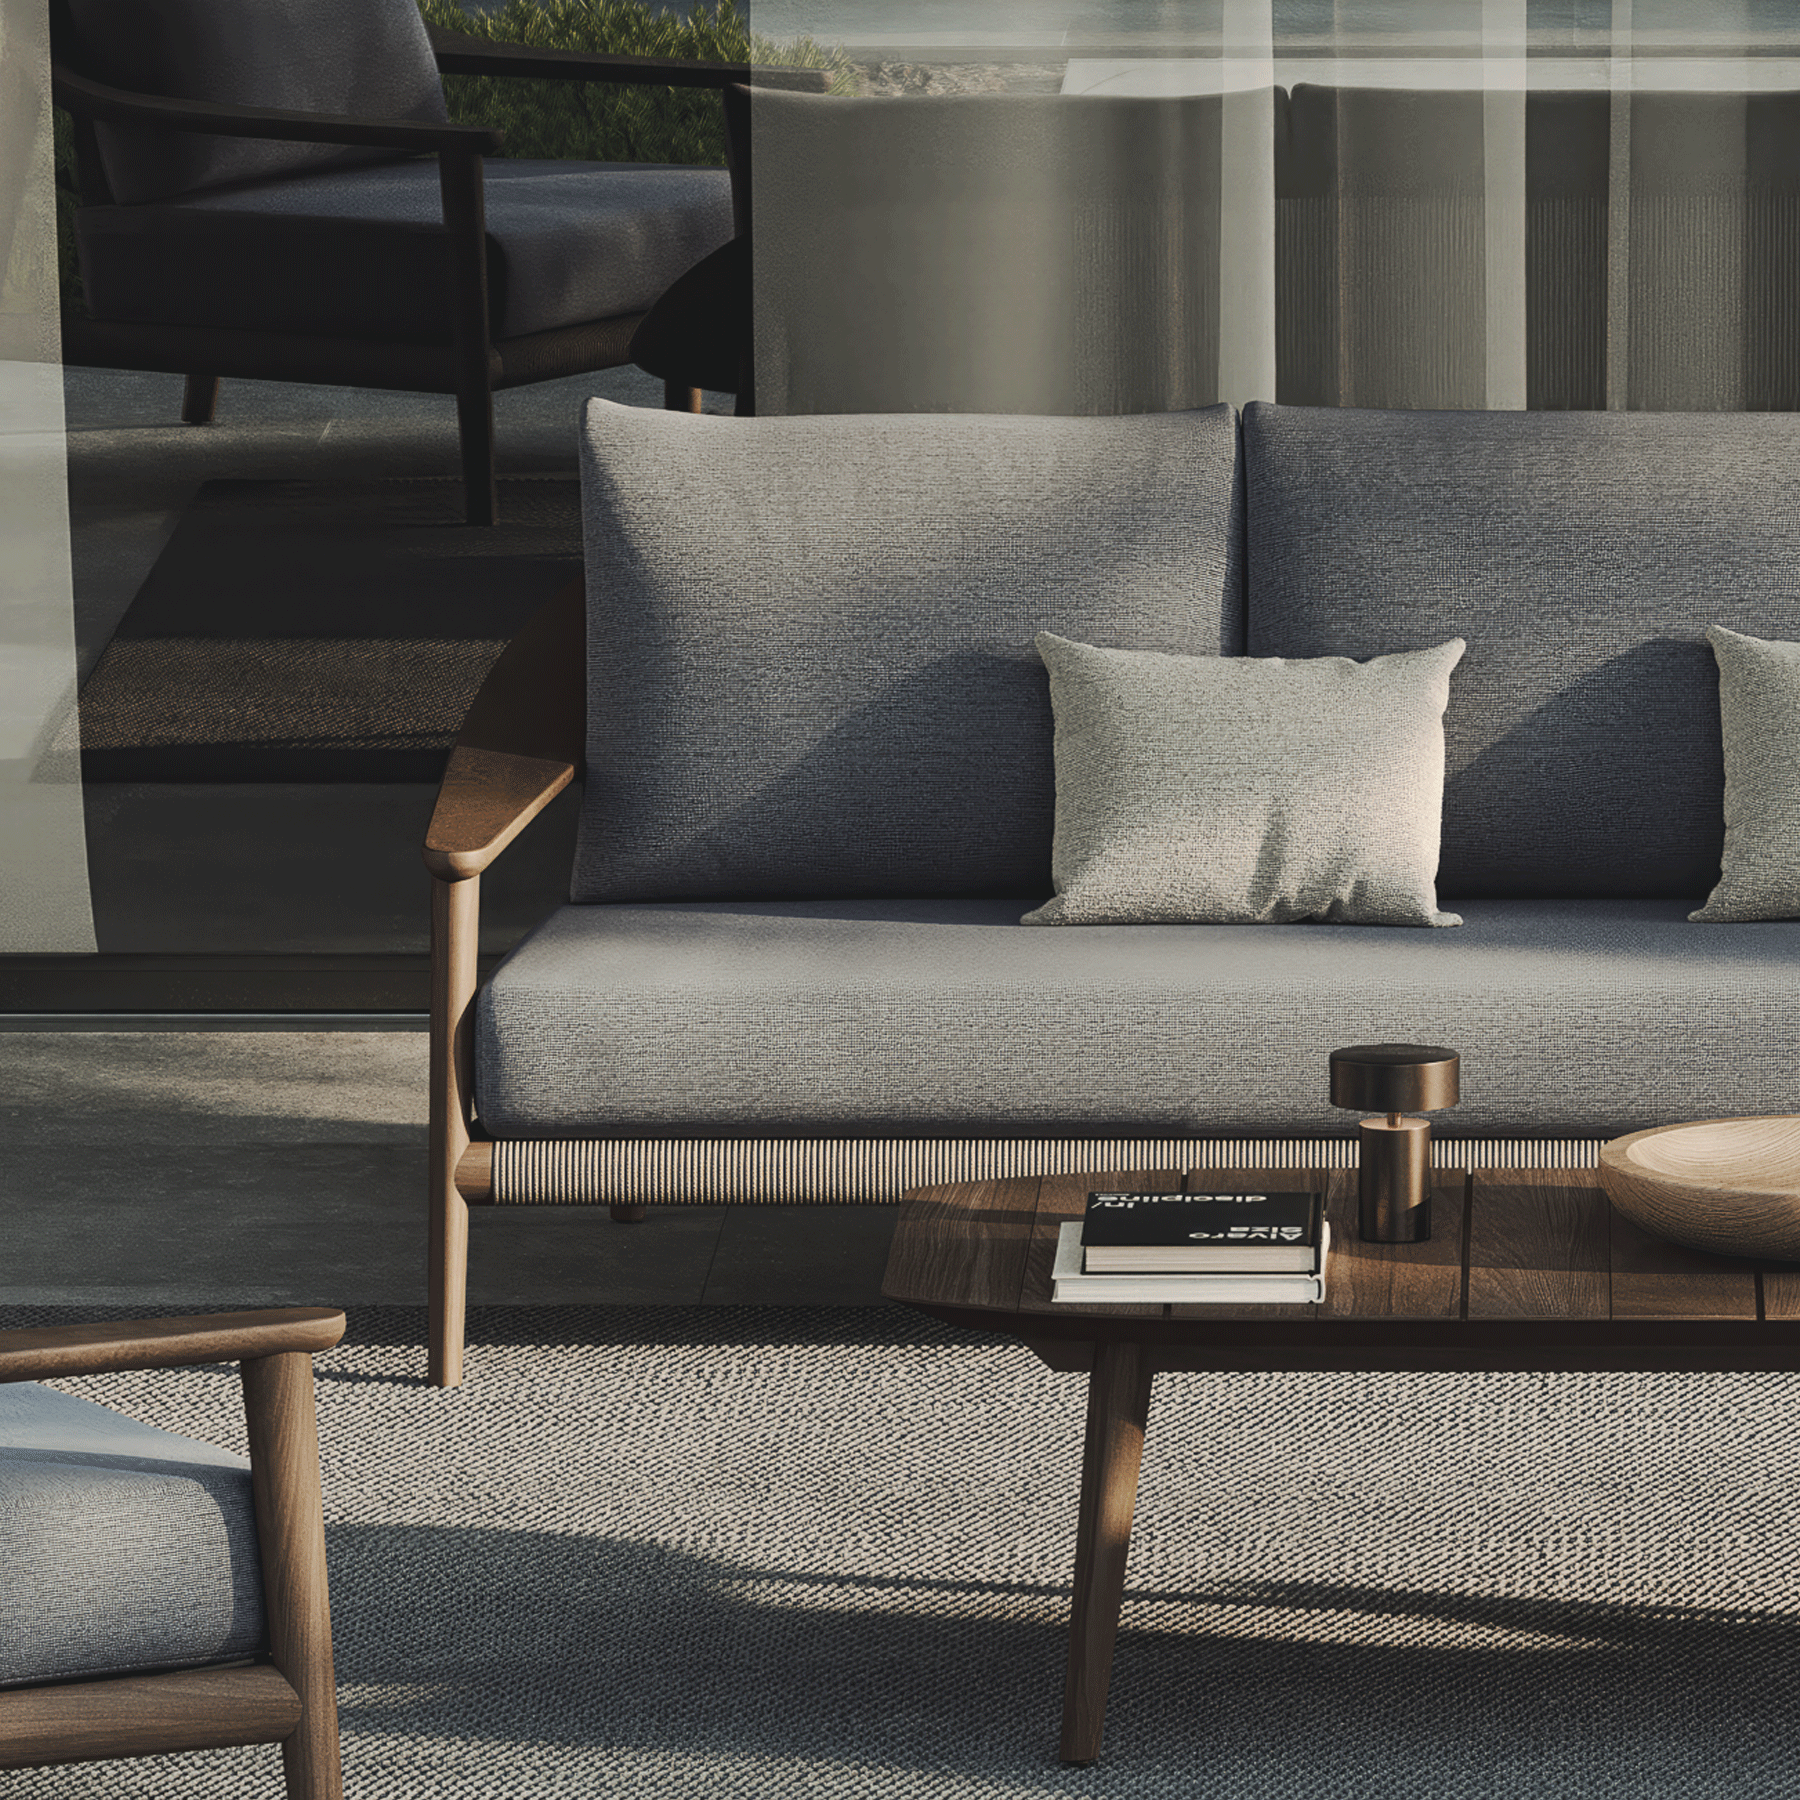 N1 luxury dark teak outdoor furniture with mid century inspired rope detail with outdoor coffee table and sofa set